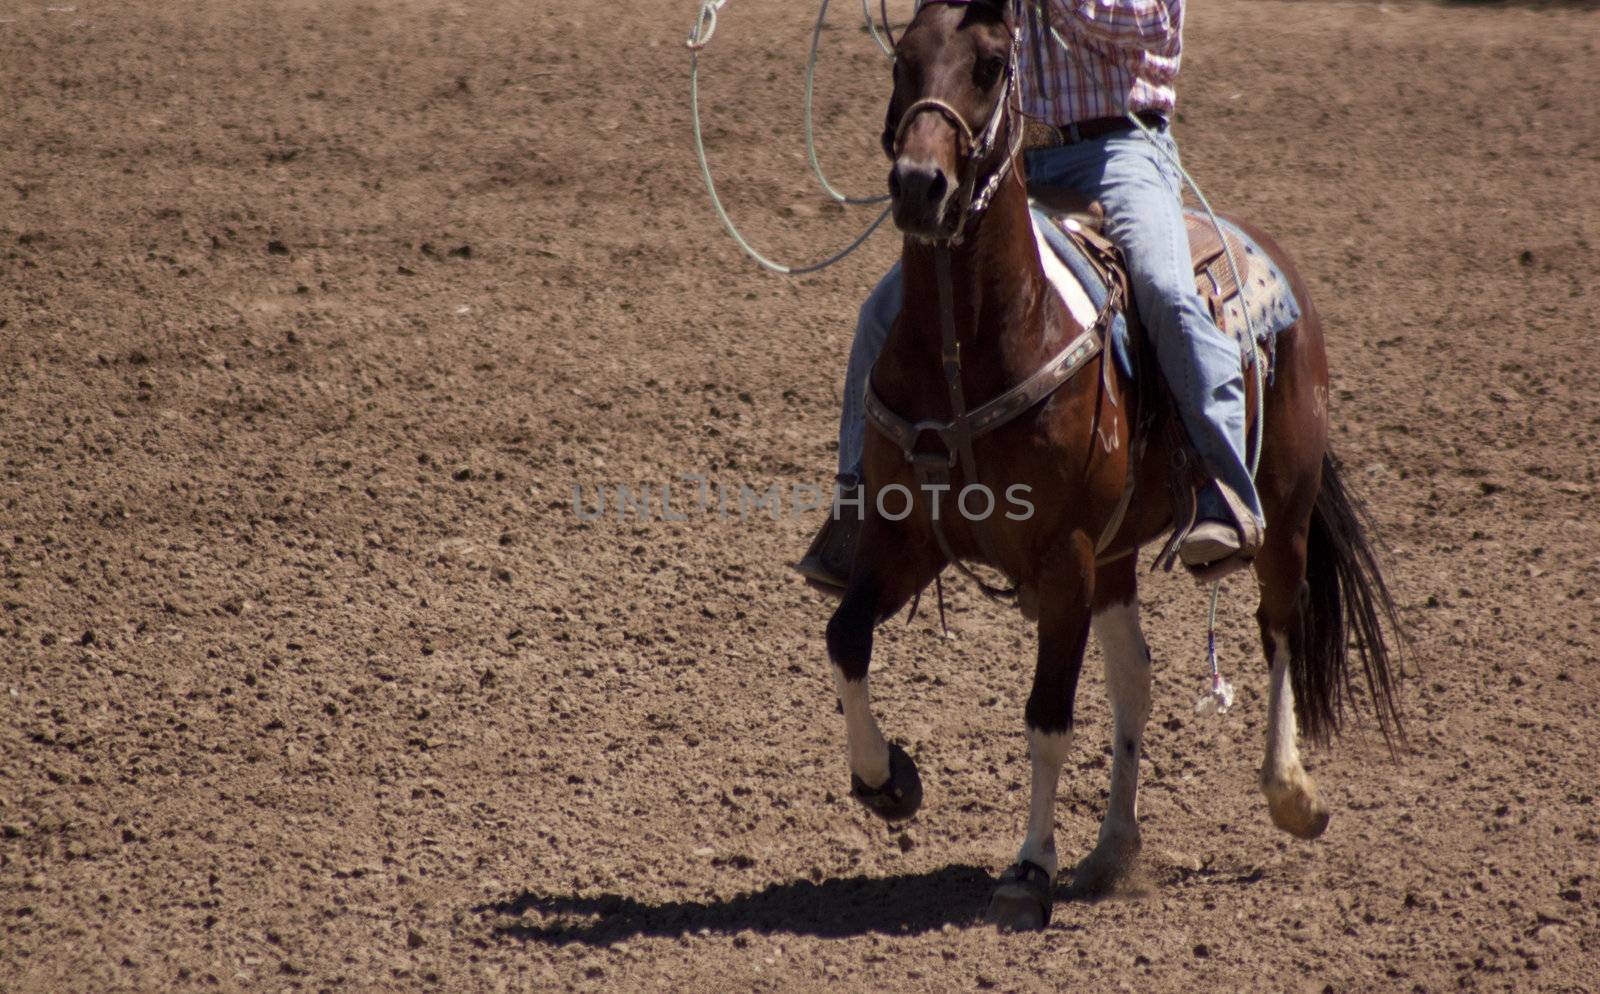 A cowbo on horse back in the middle of a dirt ranch or arena.